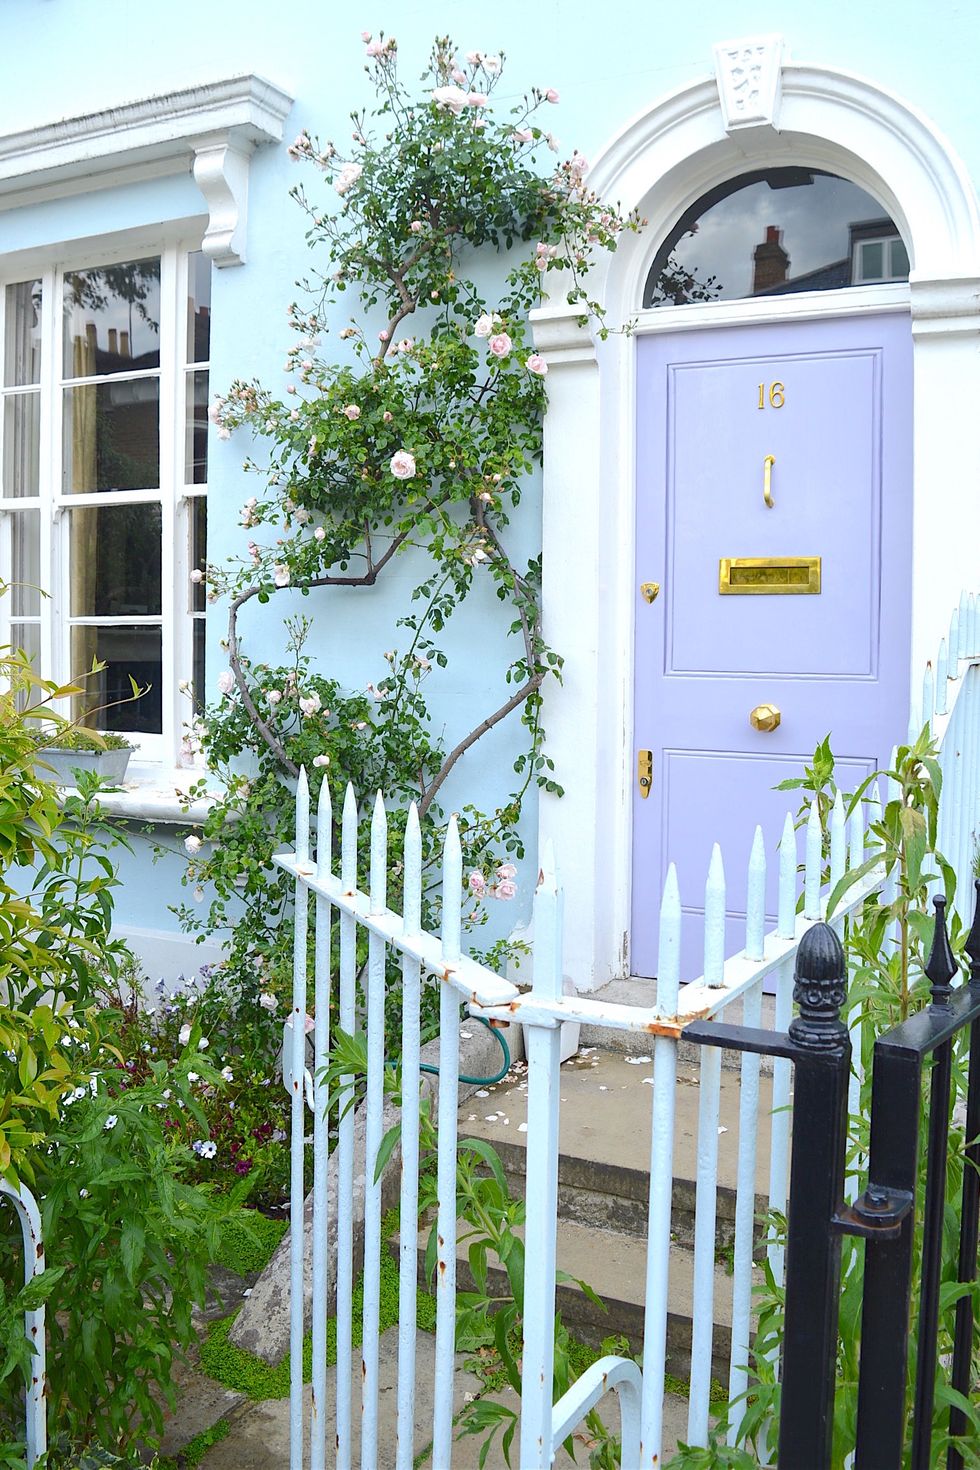 <p>Running through Hammersmith and Fulham, Wingate Road is one of the sweetest streets, packed with pastel homes, quaint gardens and amazing entrances–like this one.</p>